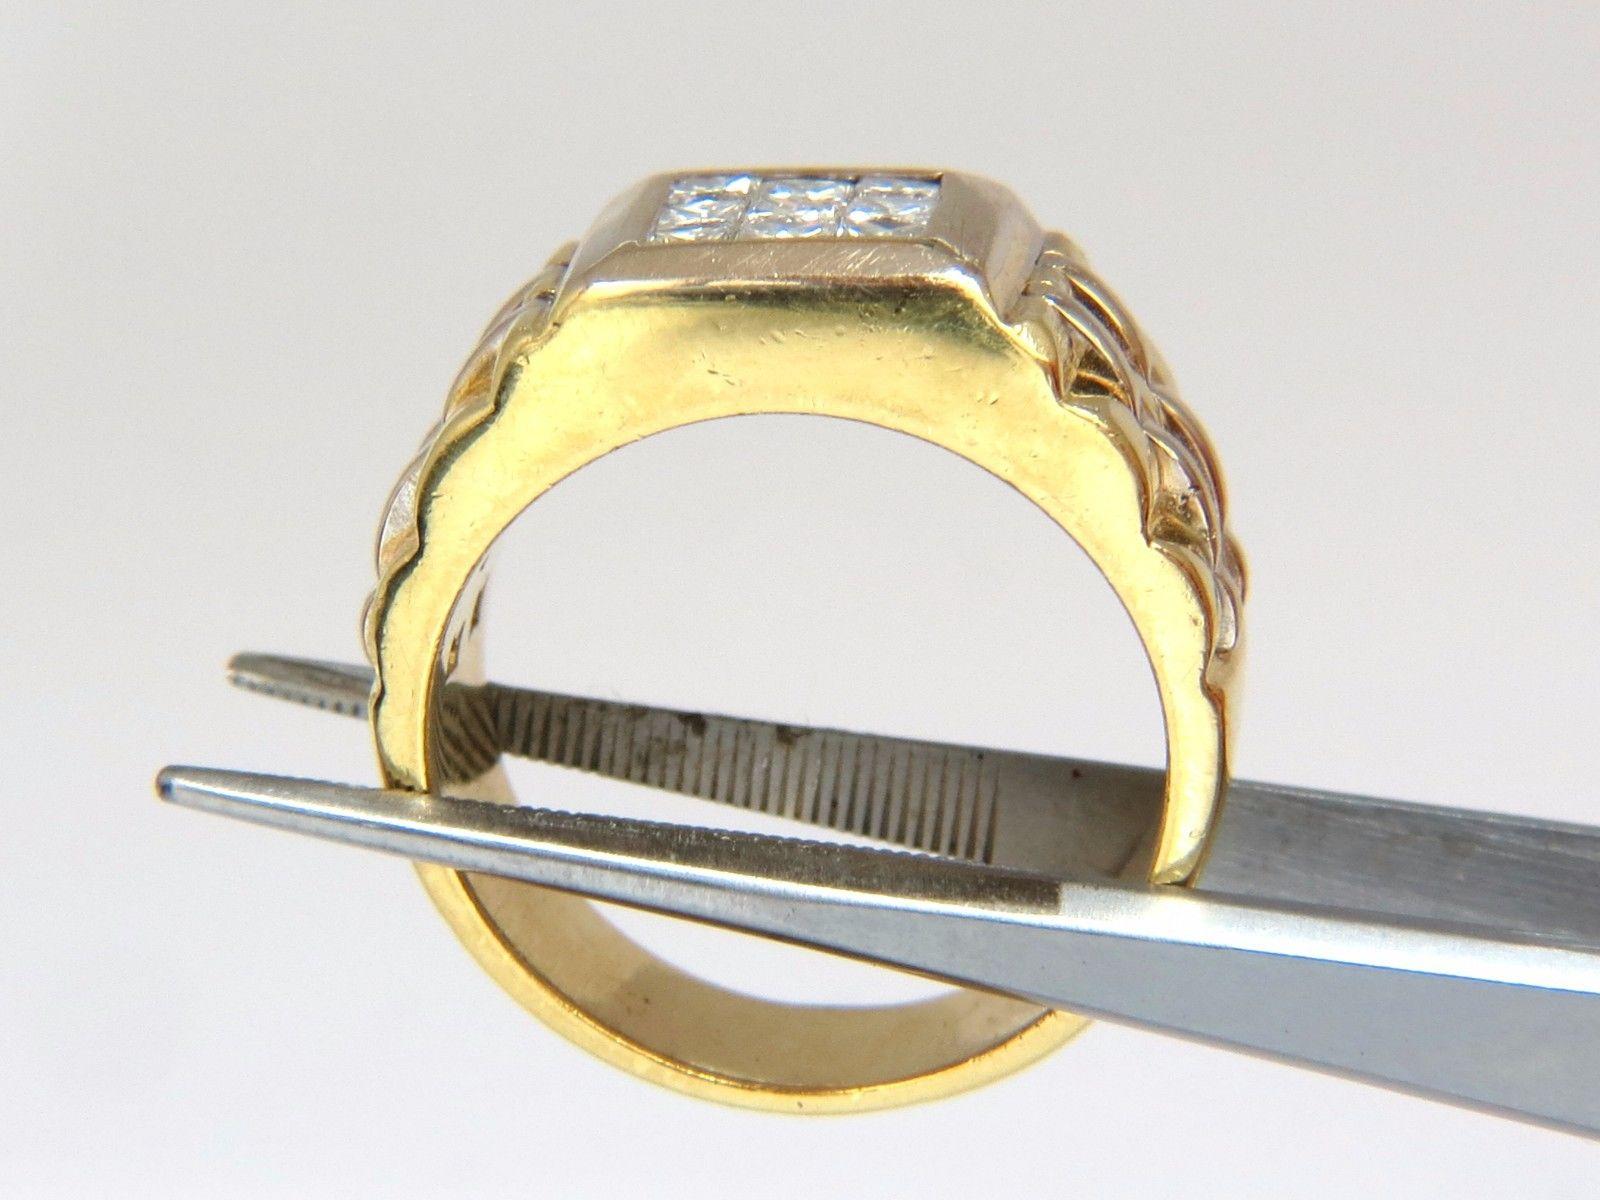 Men's princess cut  diamonds ring.

Invisible set cluster.

1.00ct. natural princess cuts diamonds.

vs-2 clarity

H-color

Natural, Earth Mined.

18kt. yellow gold 

19 grams.

Ring is 11.6mm wide 

current ring size: 10

We may resize, please